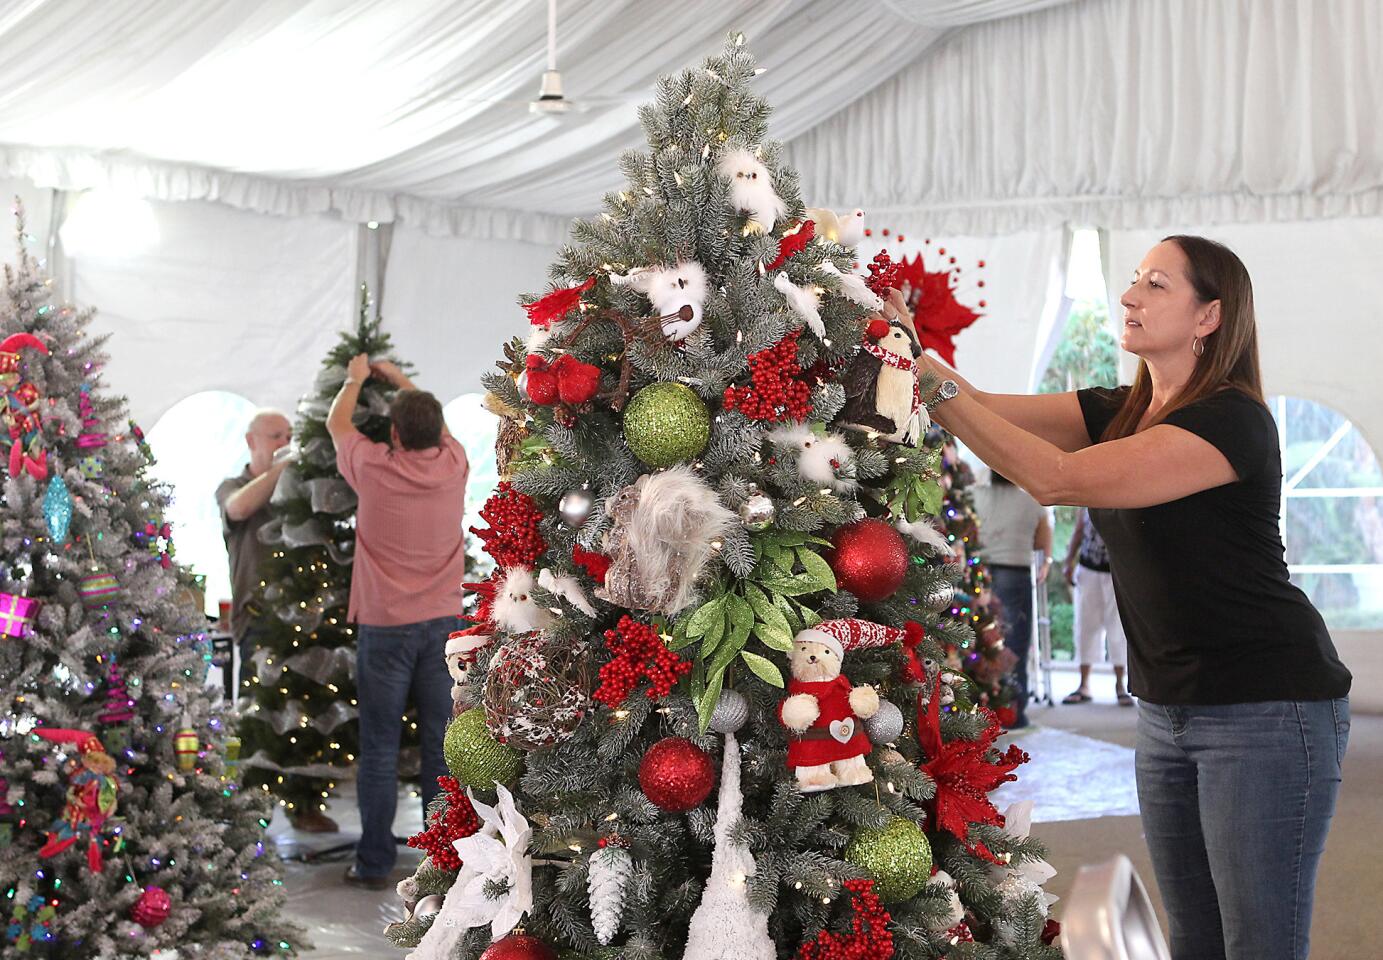 Terry Moore of the South County Outreach decorates one of the trees that will be a part of the Festival of Trees event at the Fairmont Hotel in Newport Beach. The trees will be auctioned during holiday celebration and proceeds will benefit South Coast Outreach programs.